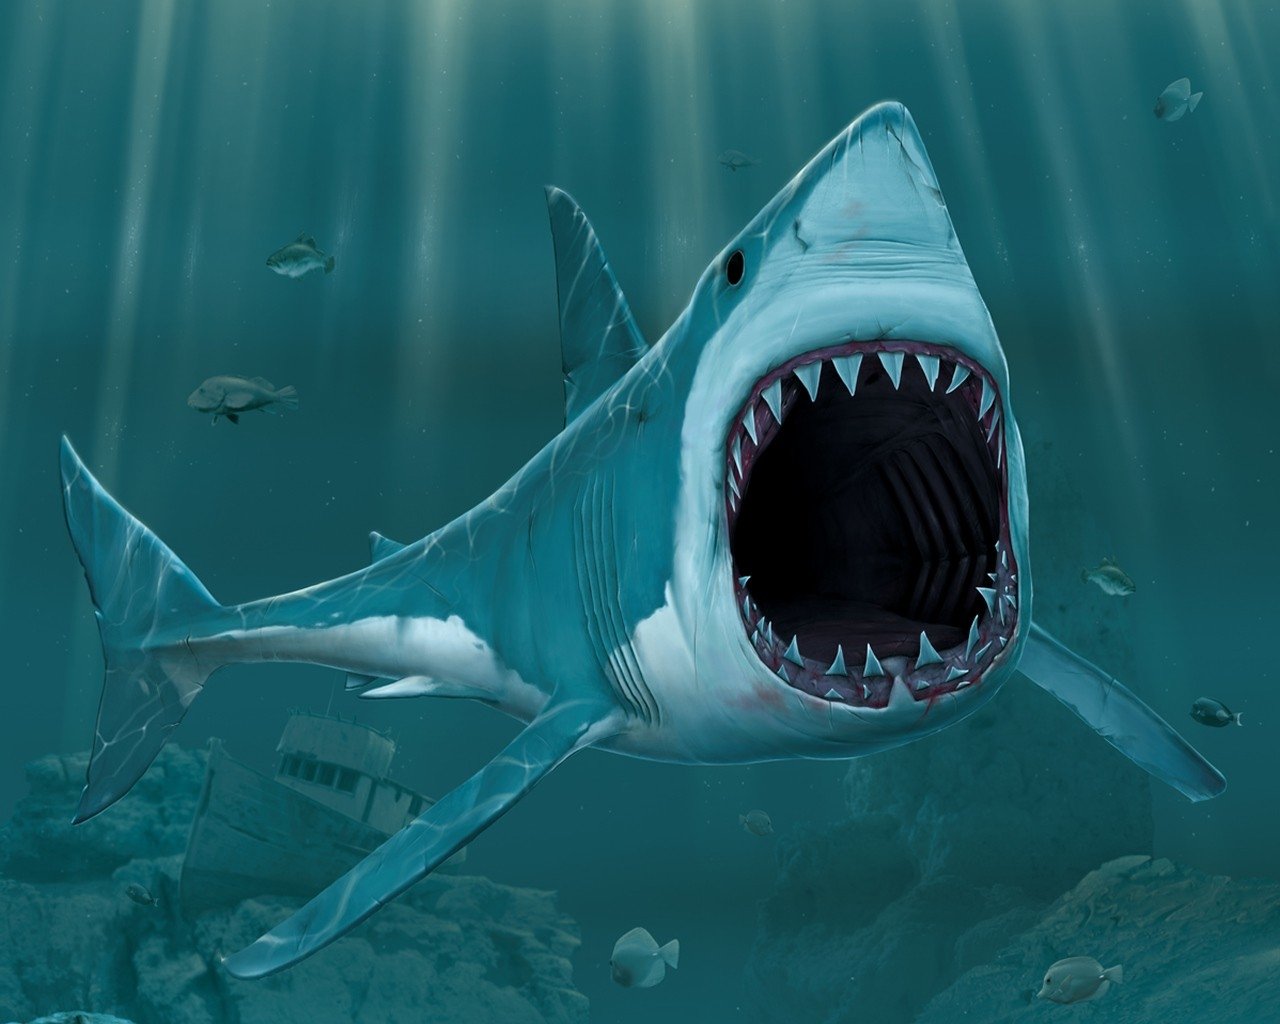 sharks open mouth 1280x1024 wallpaper High Quality Wallpaper, High Definition Wallpaper